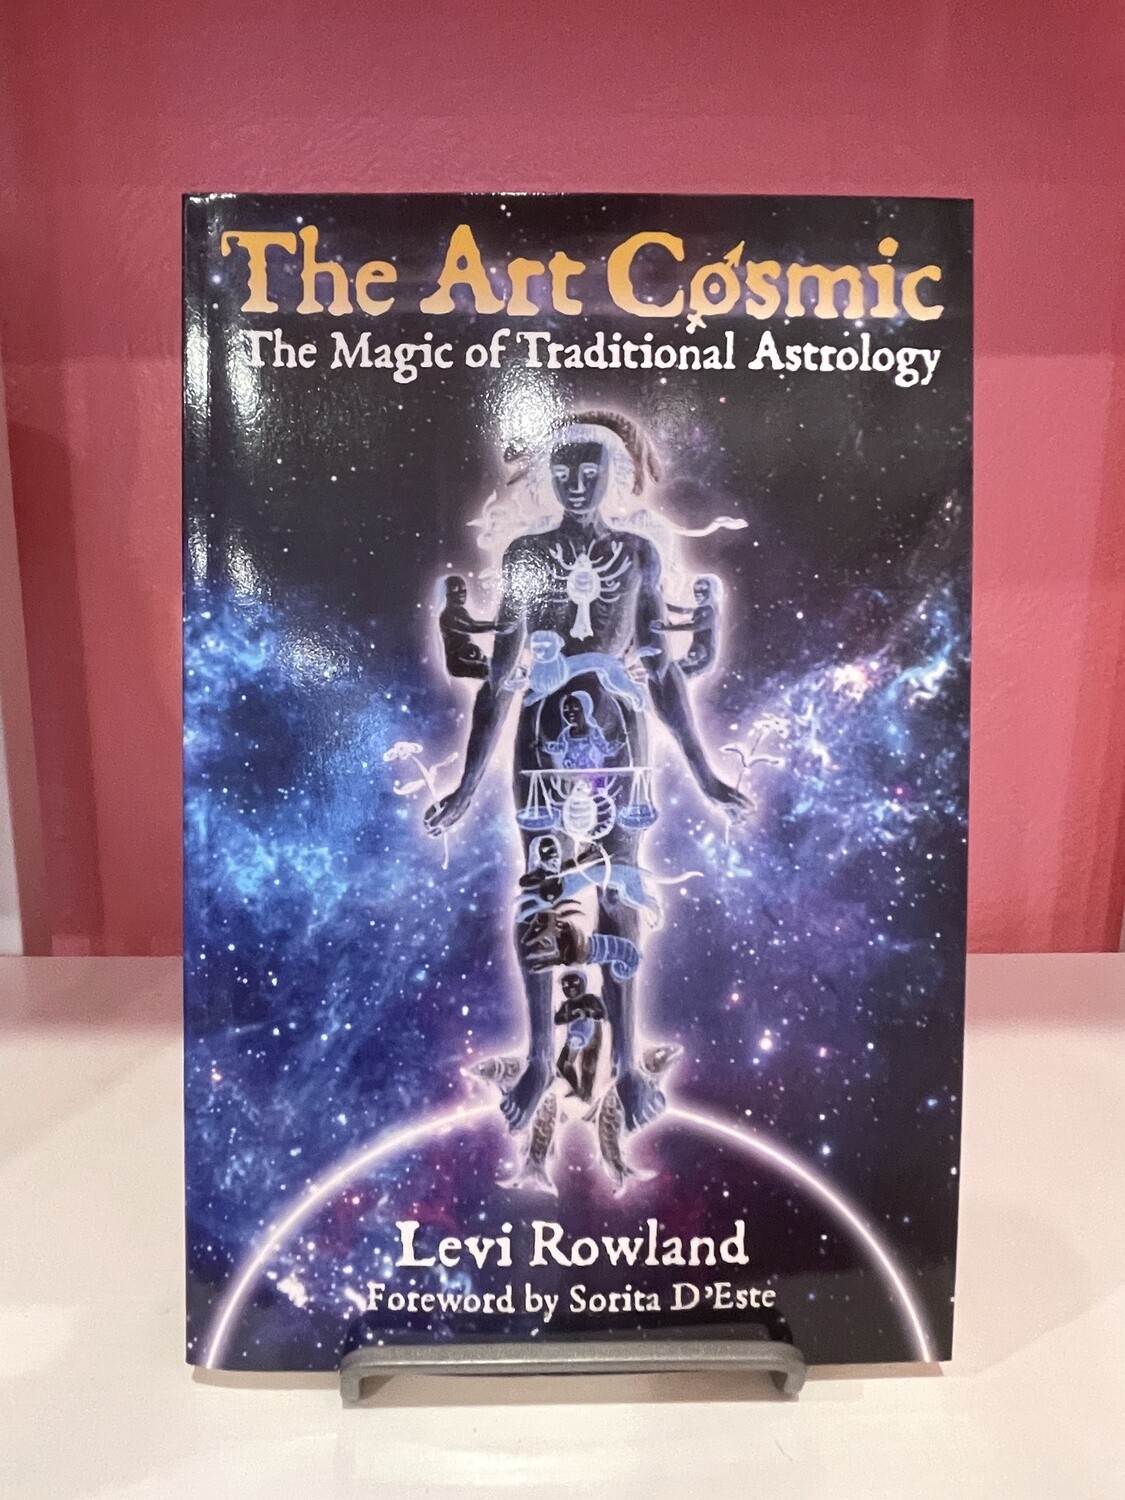 Art Cosmic: The Magic of Traditional Astrology